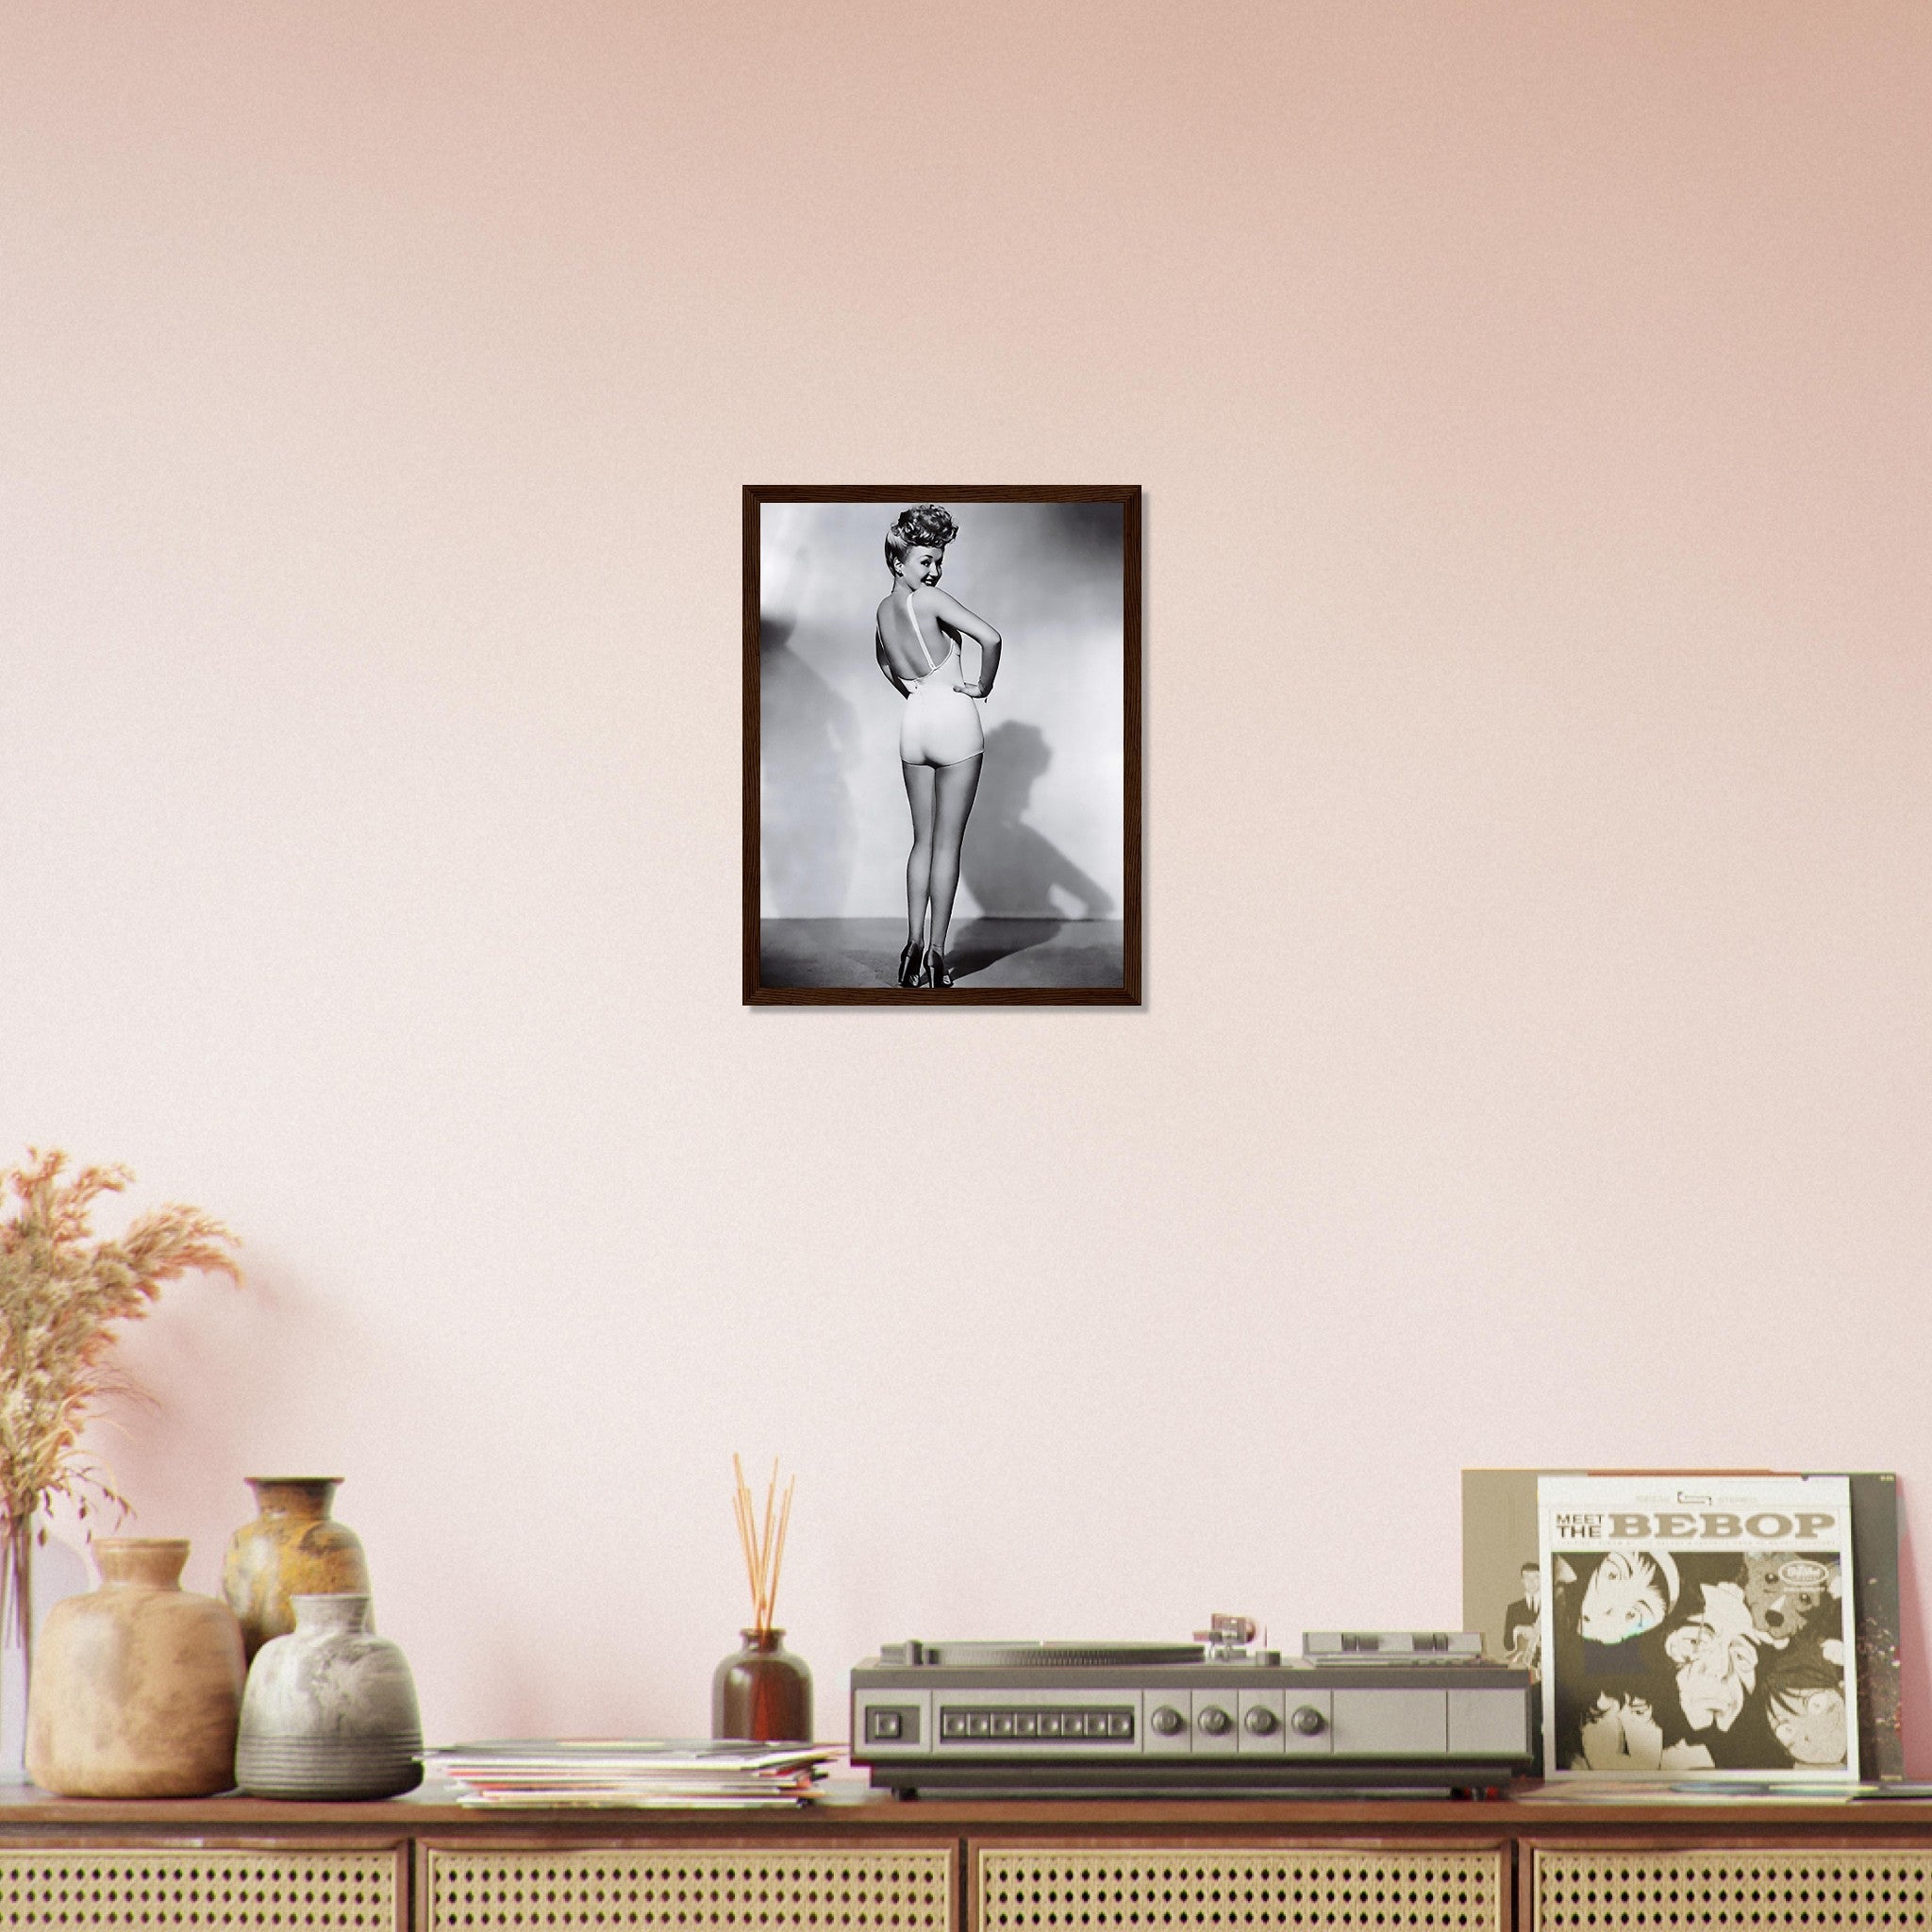 Betty Grable Swimsuit Framed, Famous Photo Framed Print From 1943, First Pin Up Girl, Inspired American Soldiers In Ww2. - WallArtPrints4U